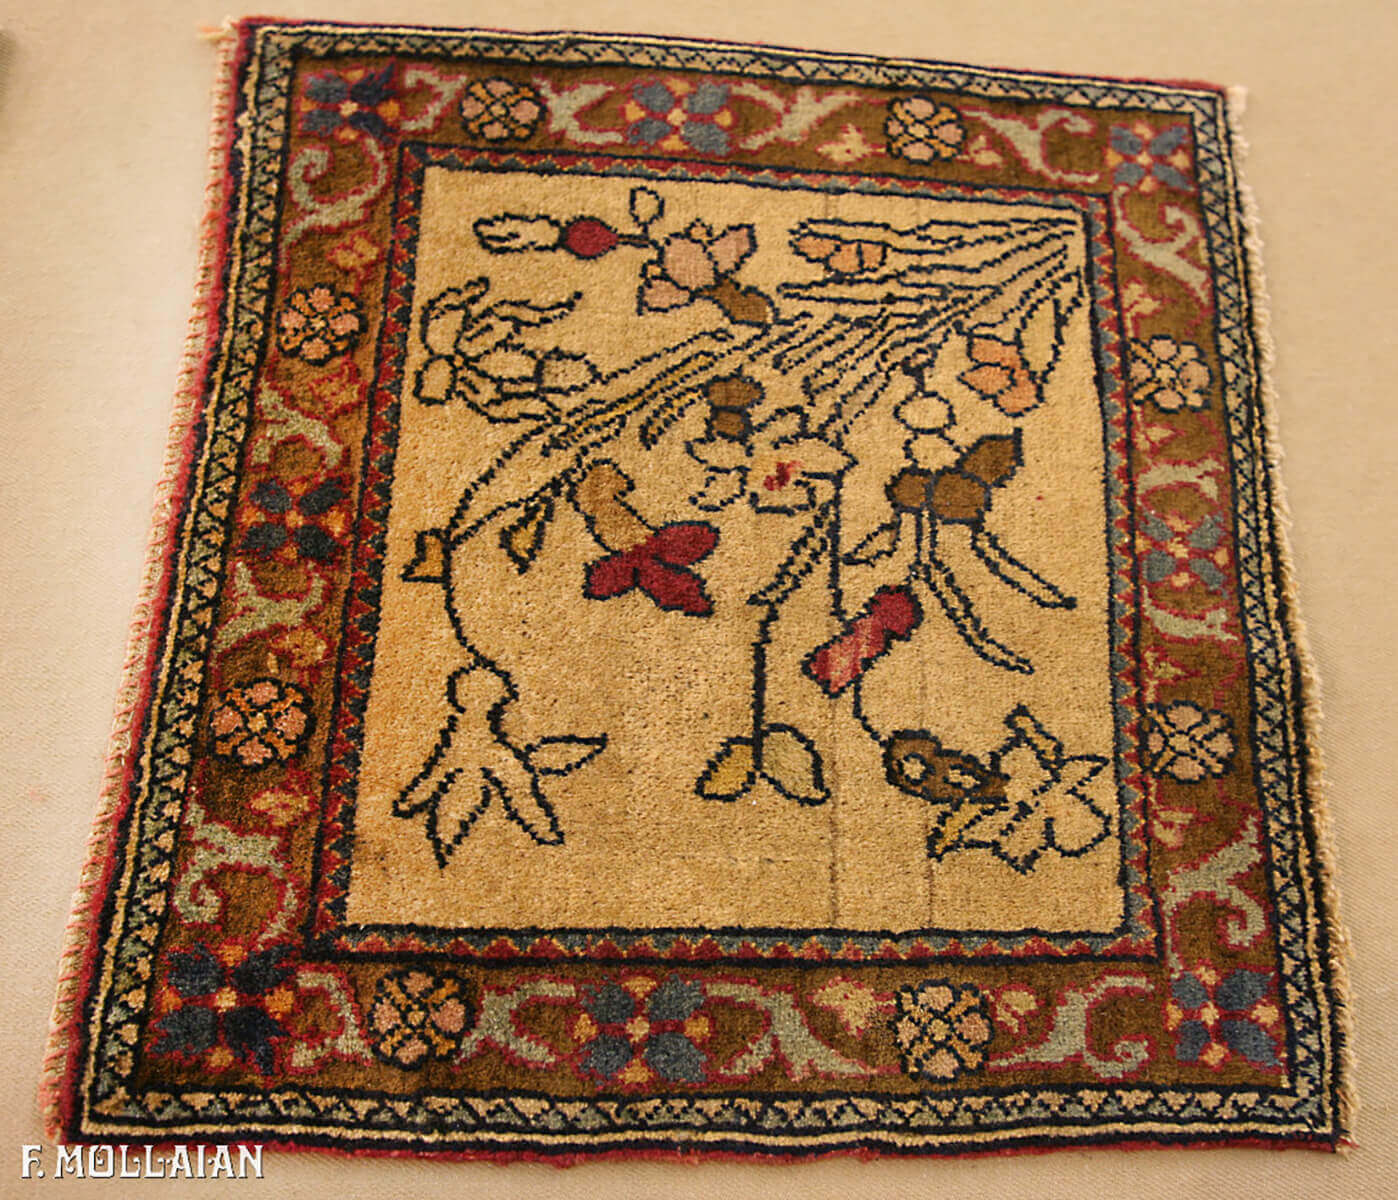 A Very Small Antique Persian Pair of Isfahan Rug n°:38442365-74874890